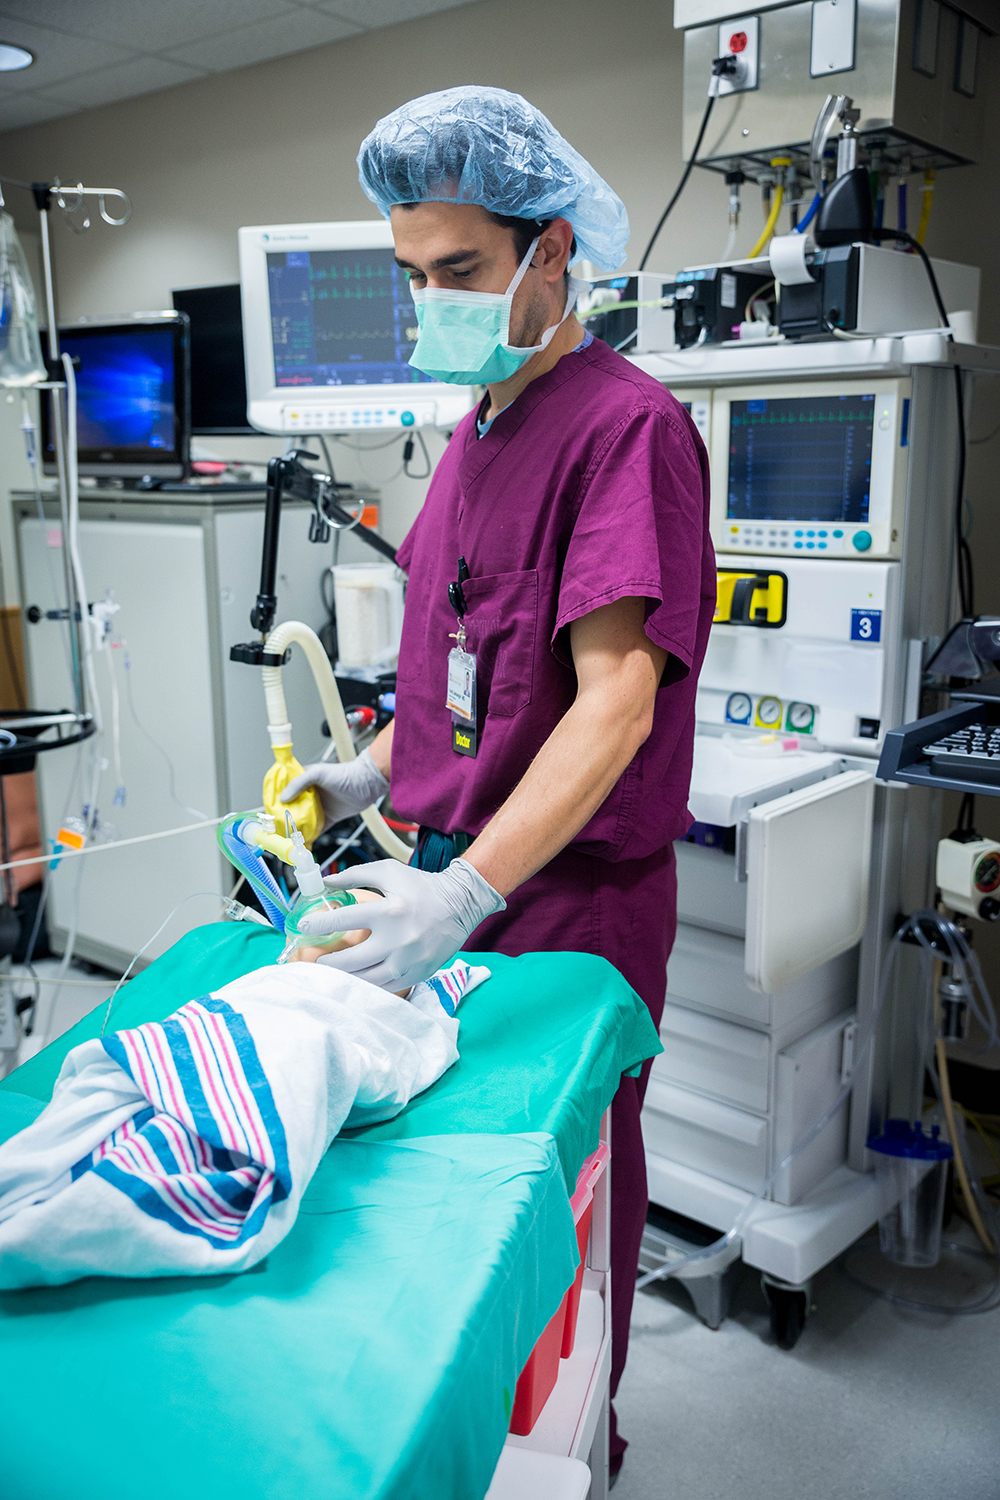 Anesthesia resident participates in a pediatric anesthesia simulation